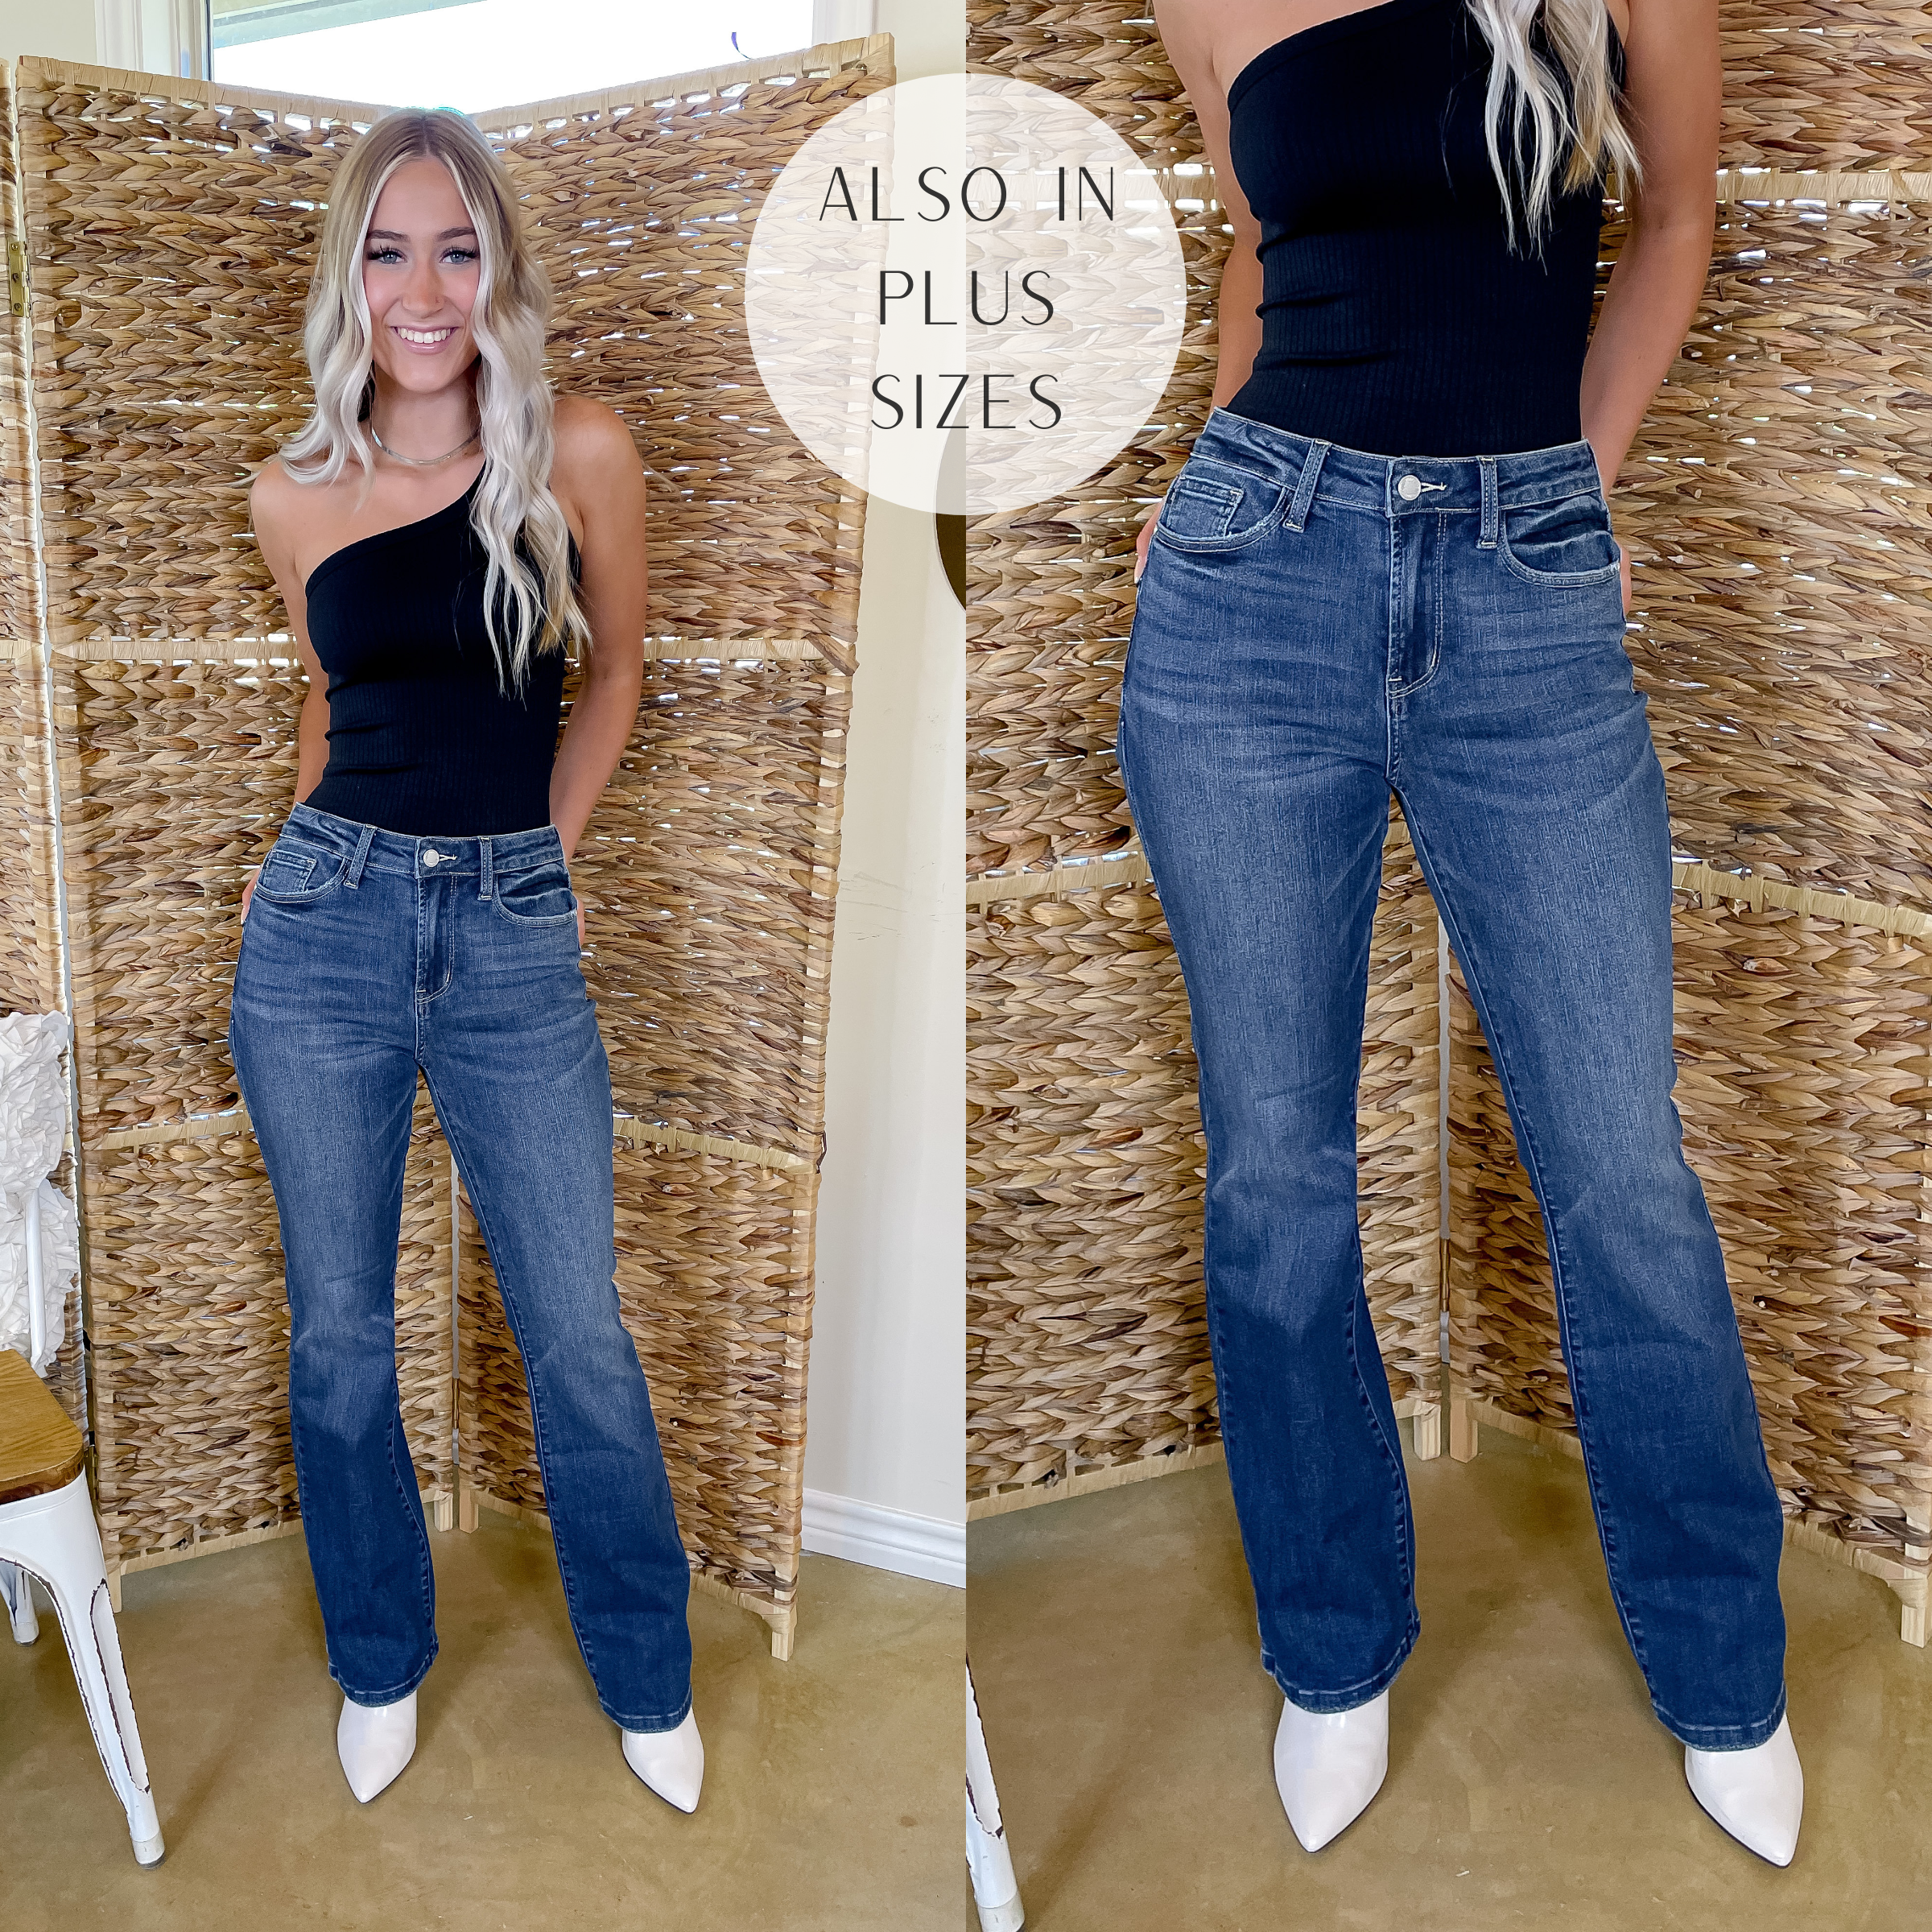 Model is wearing dark wash, bootcut jeans in a size 1/26. Model paired these jeans with a black, one shoulder bodysuit and white boots.